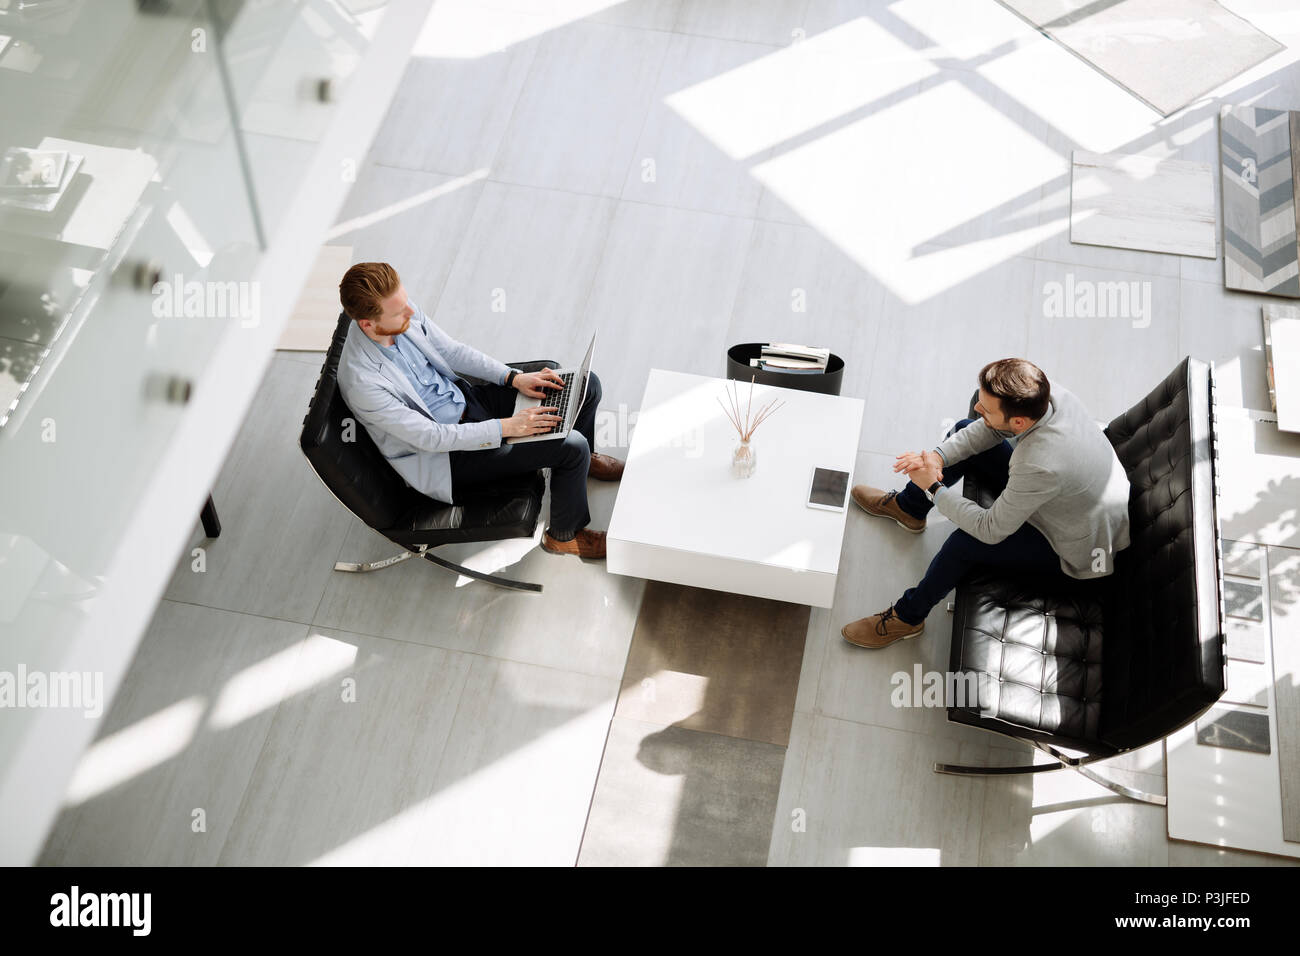 Business Meeting in der Lobby Stockfoto